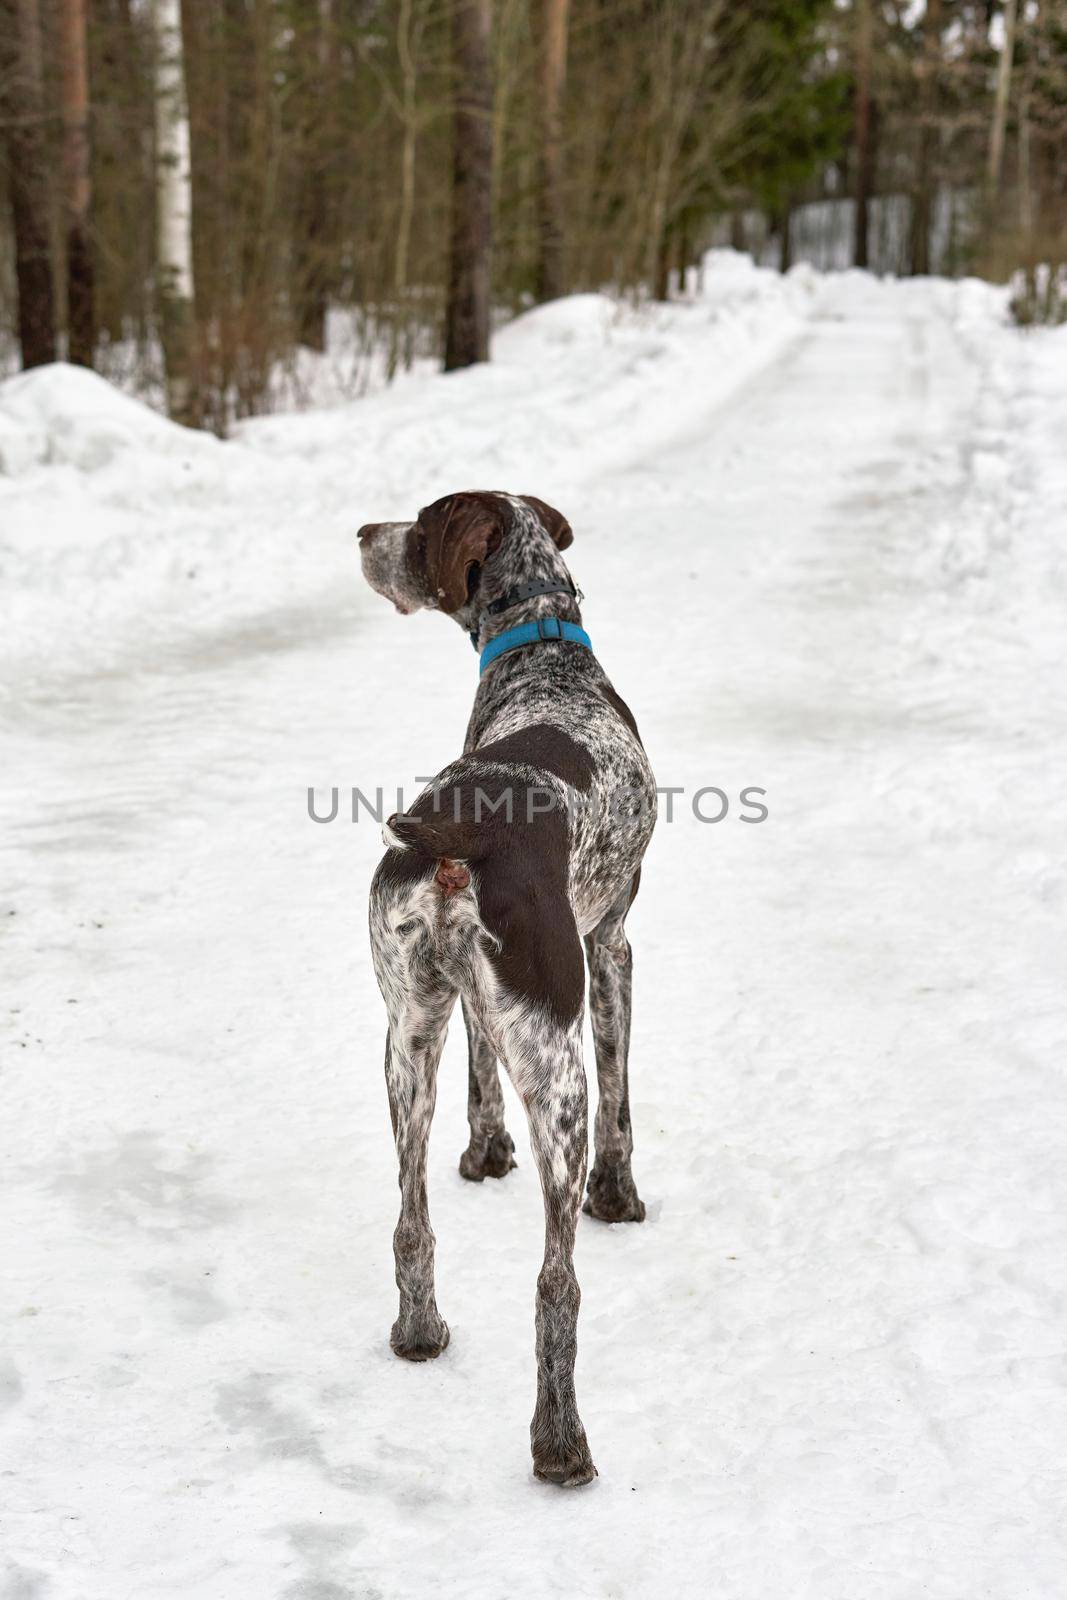 Large spotted hunting dog stands on forest road amid snow. Vertical shot